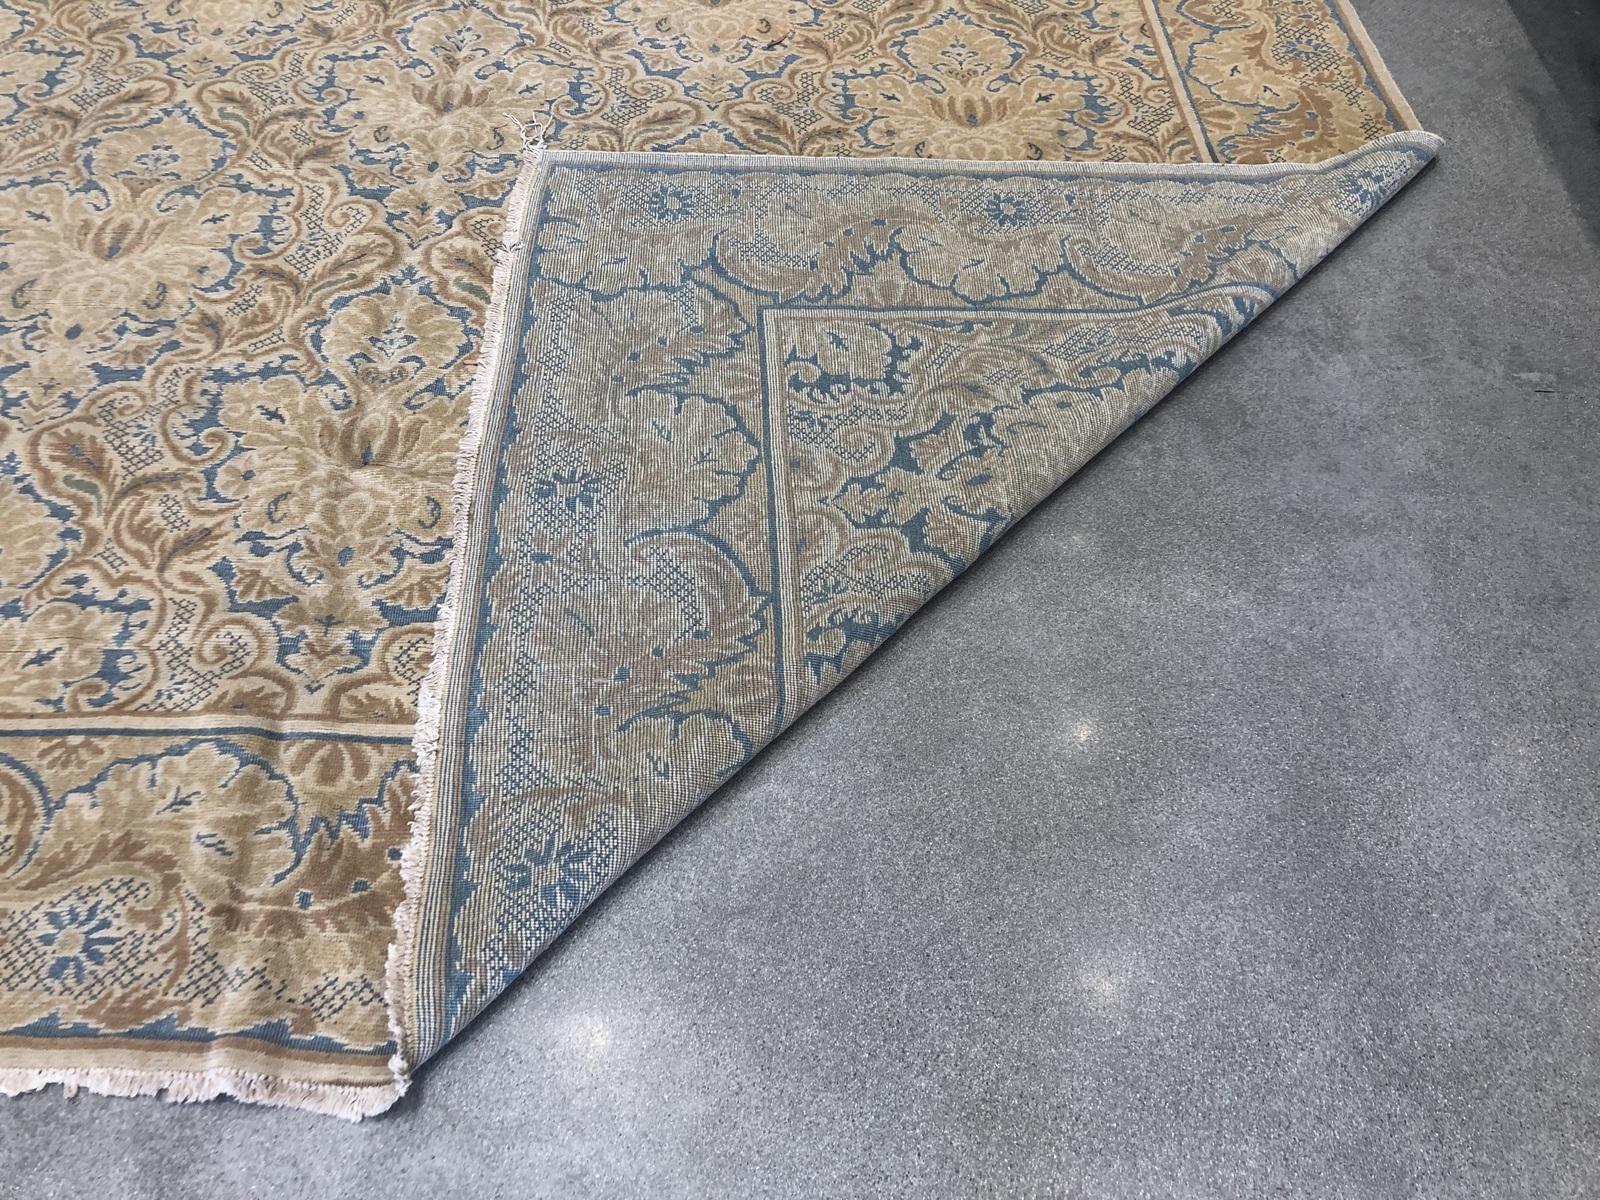 European Design Rug In Excellent Condition For Sale In Los Angeles, CA